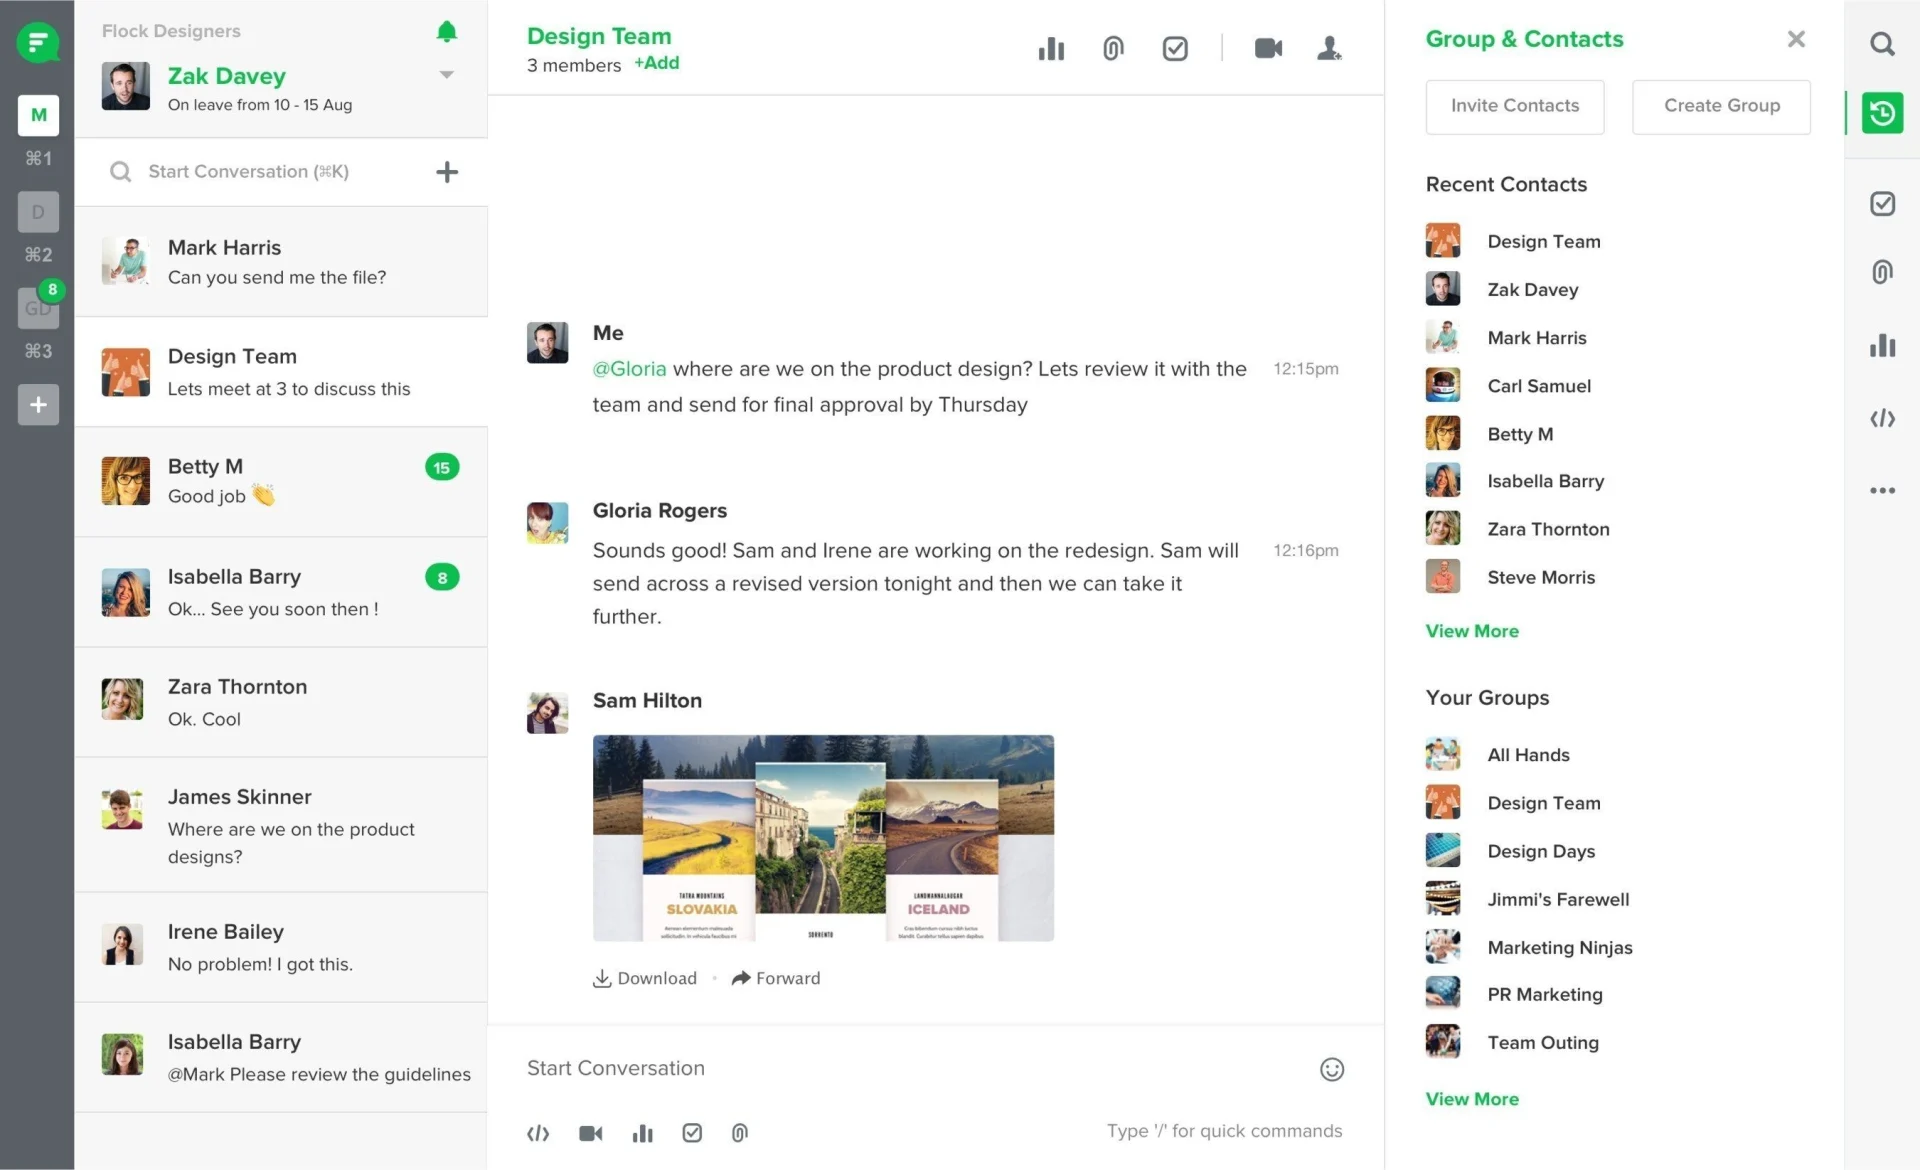 Flock is an app for team communication and team collaboration.